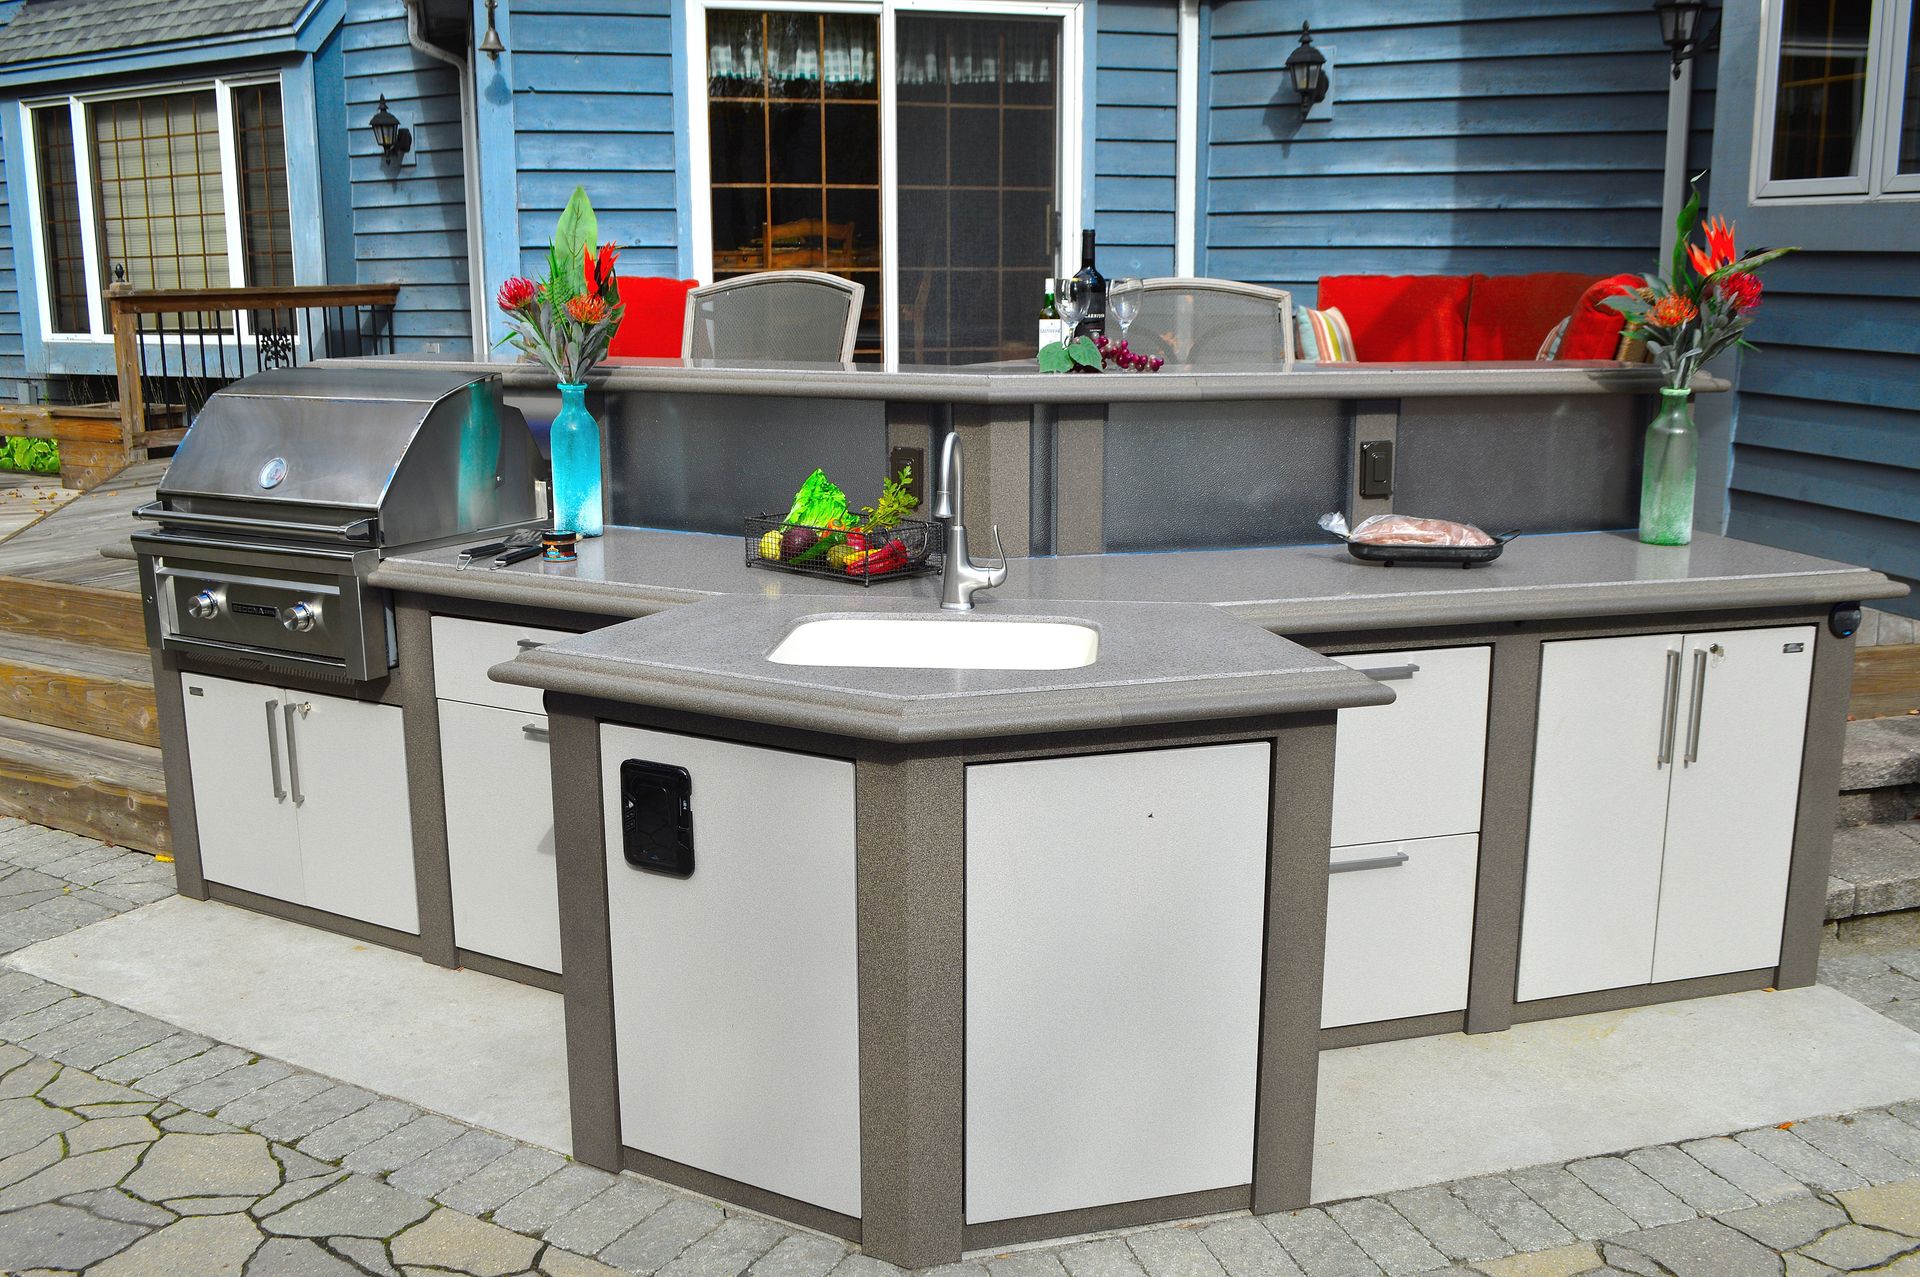 outdoor cooking area with grill, countertops, and sink, installed by ener-g tech, inc.